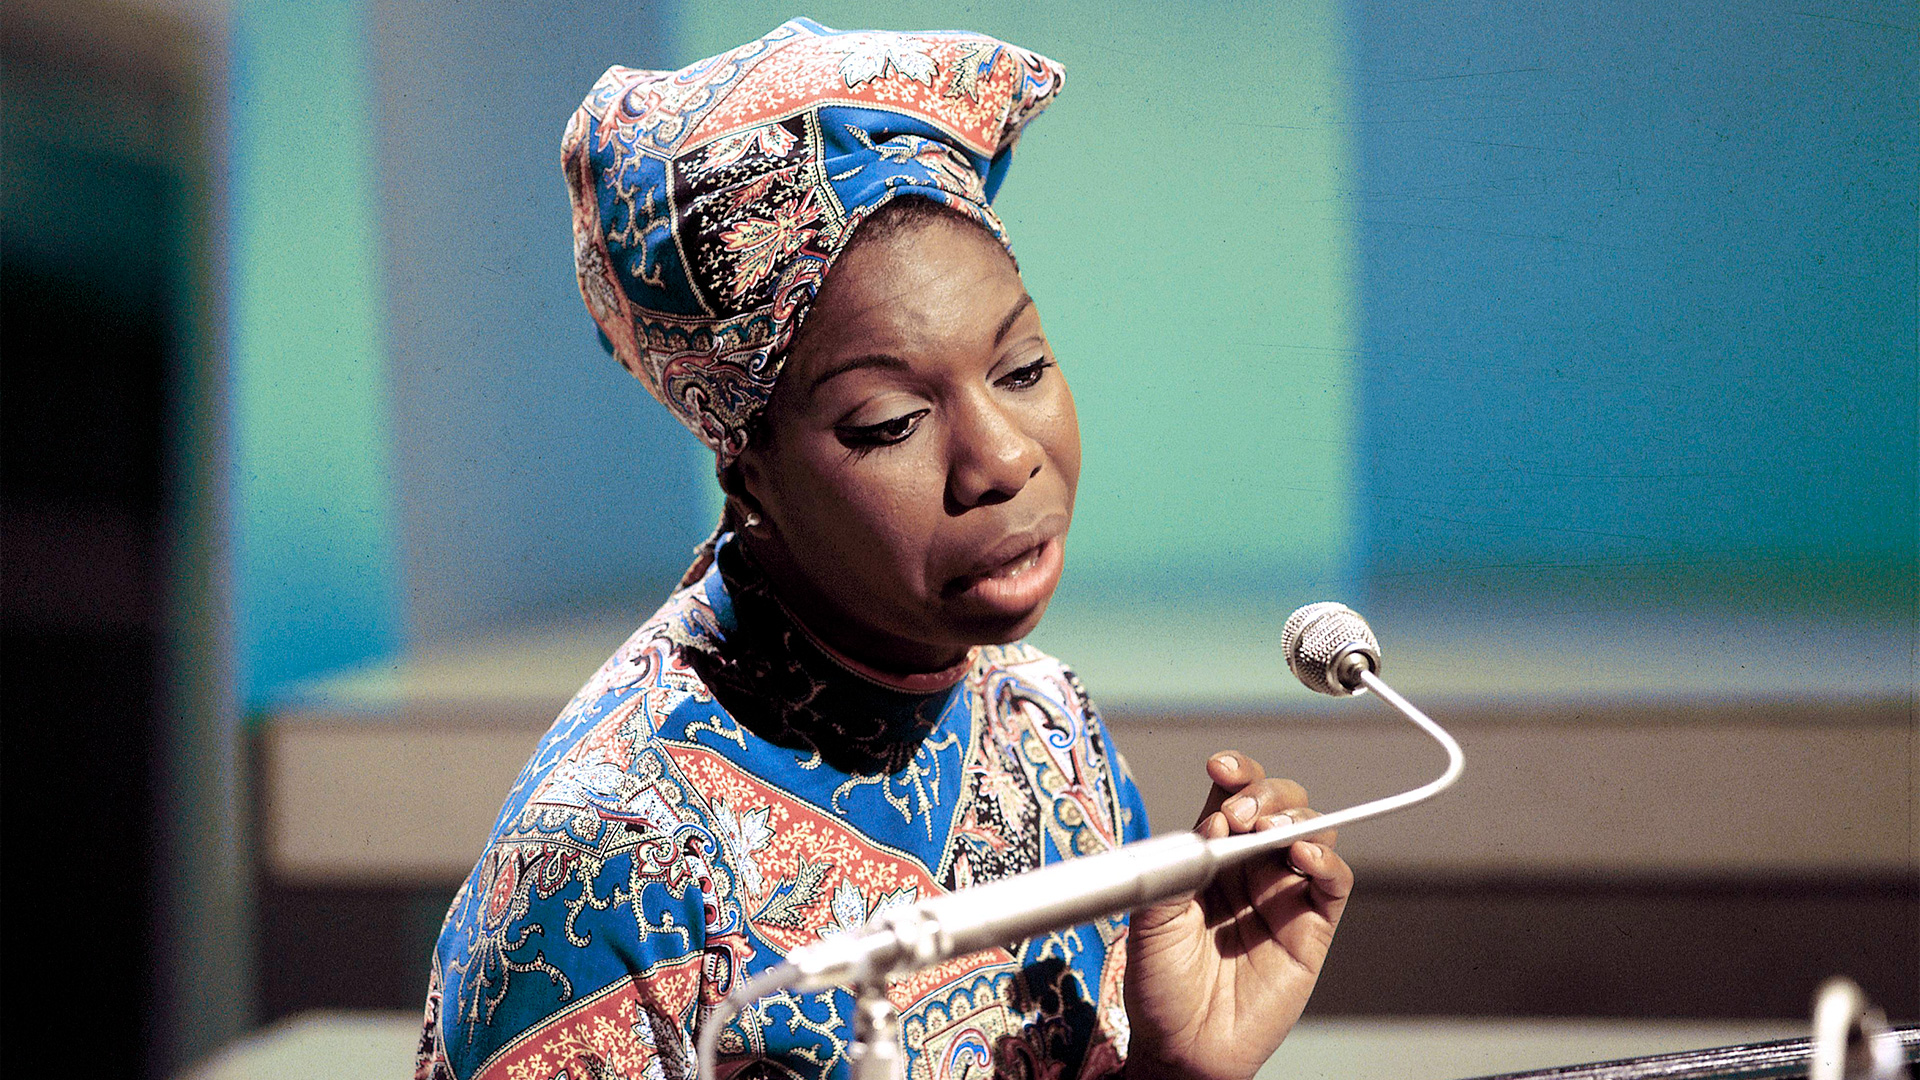 Watch Official Trailer for "What Happened, Miss Simone?"